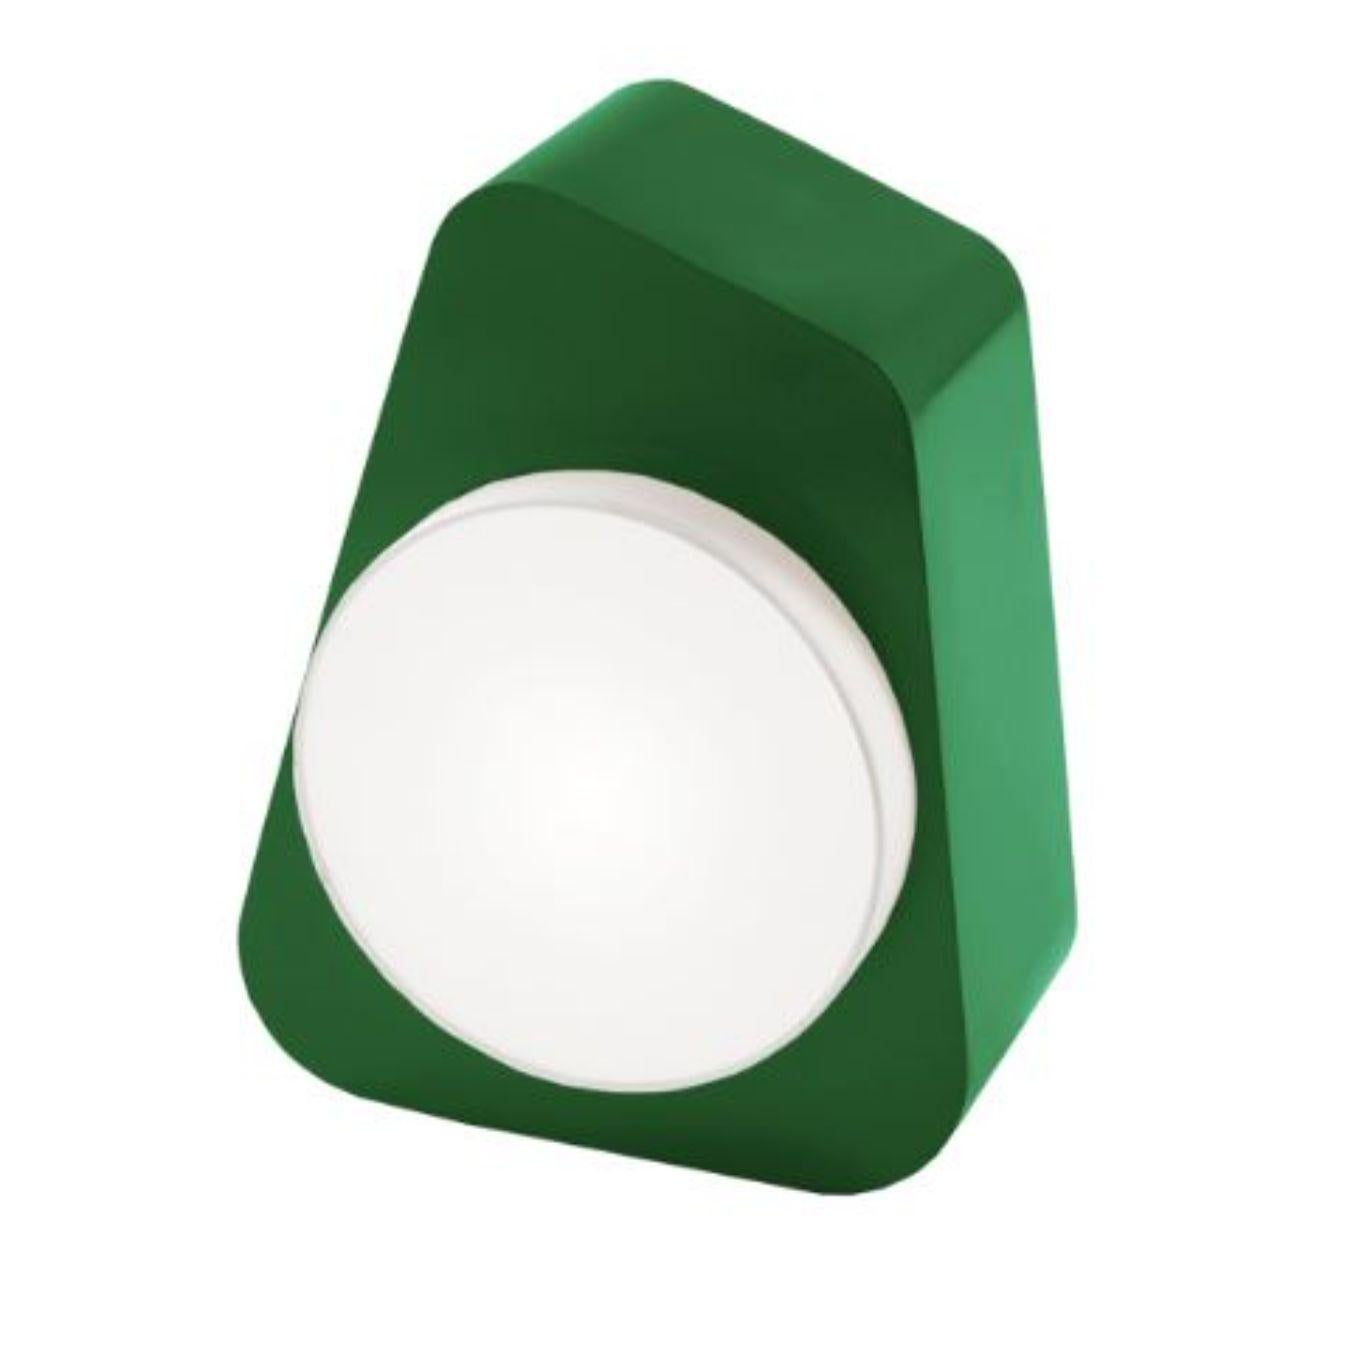 Emerald Carousel wall lamp by Dooq
Dimensions: W 30 x D 18 x H 40 cm
Materials: lacquered metal
Abat-jour: cotton
Also available in different colours and materials.

Information:
230V/50Hz
E27/1x25W LED
120V/60Hz
E26/1x10W LED
bulb not